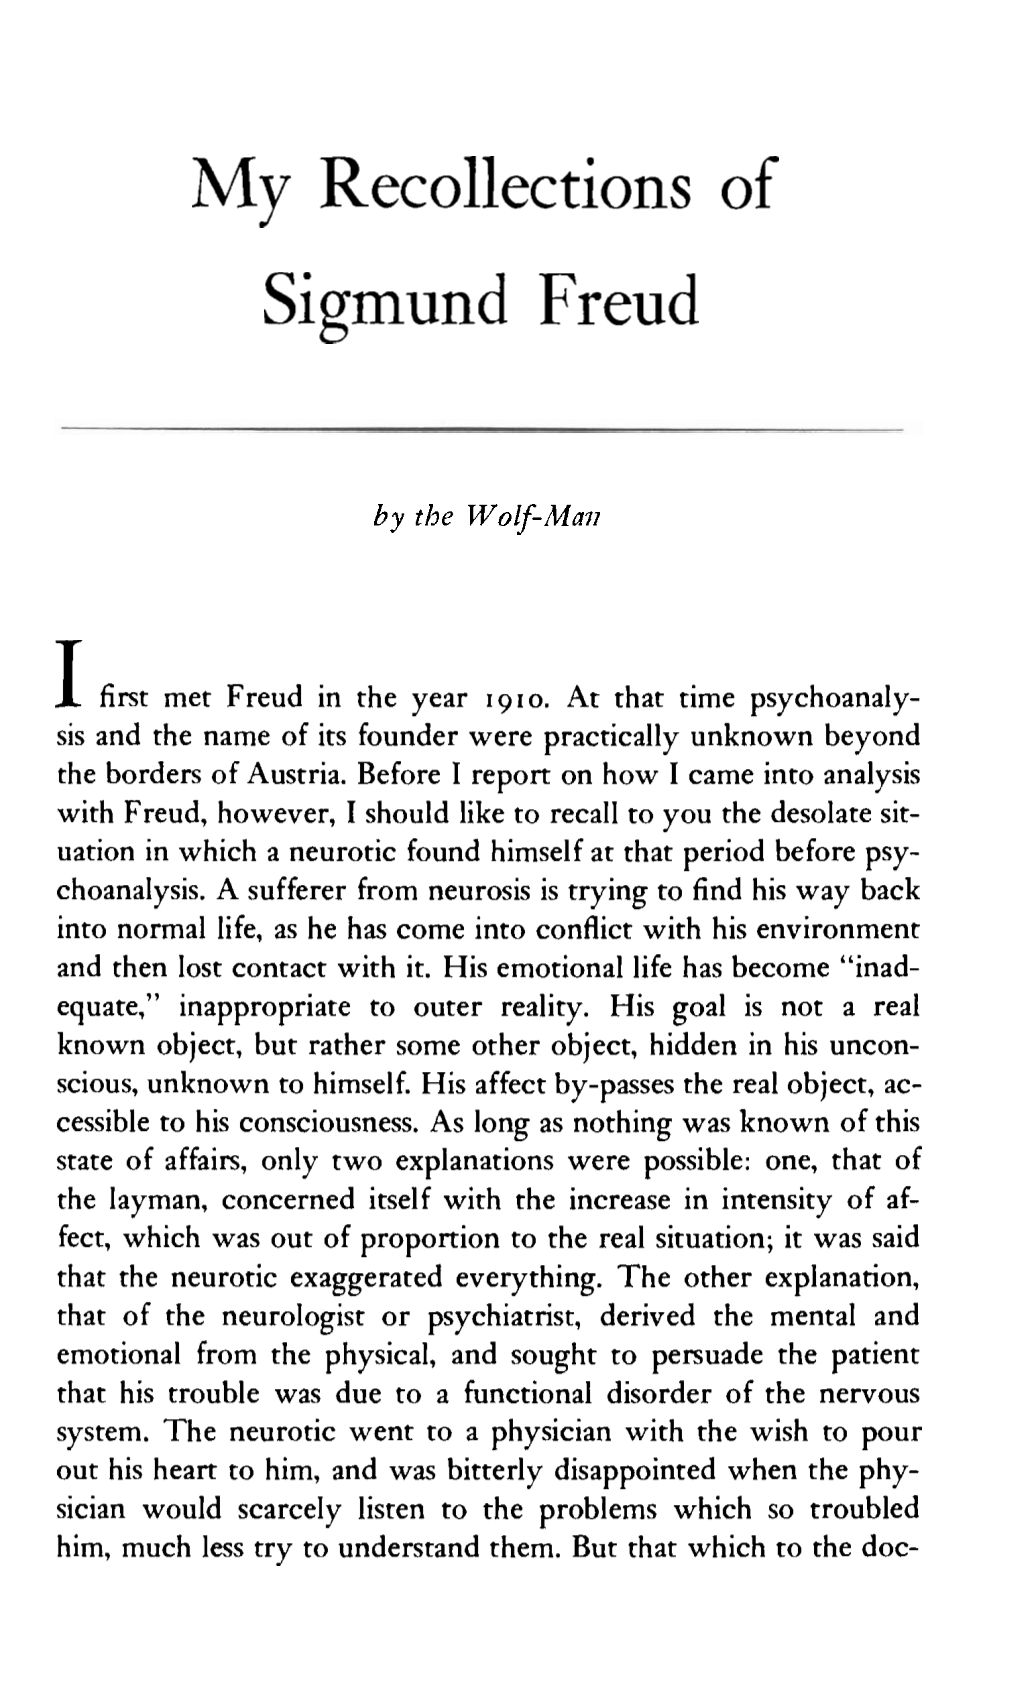 My Recollections of Sigmund Freud